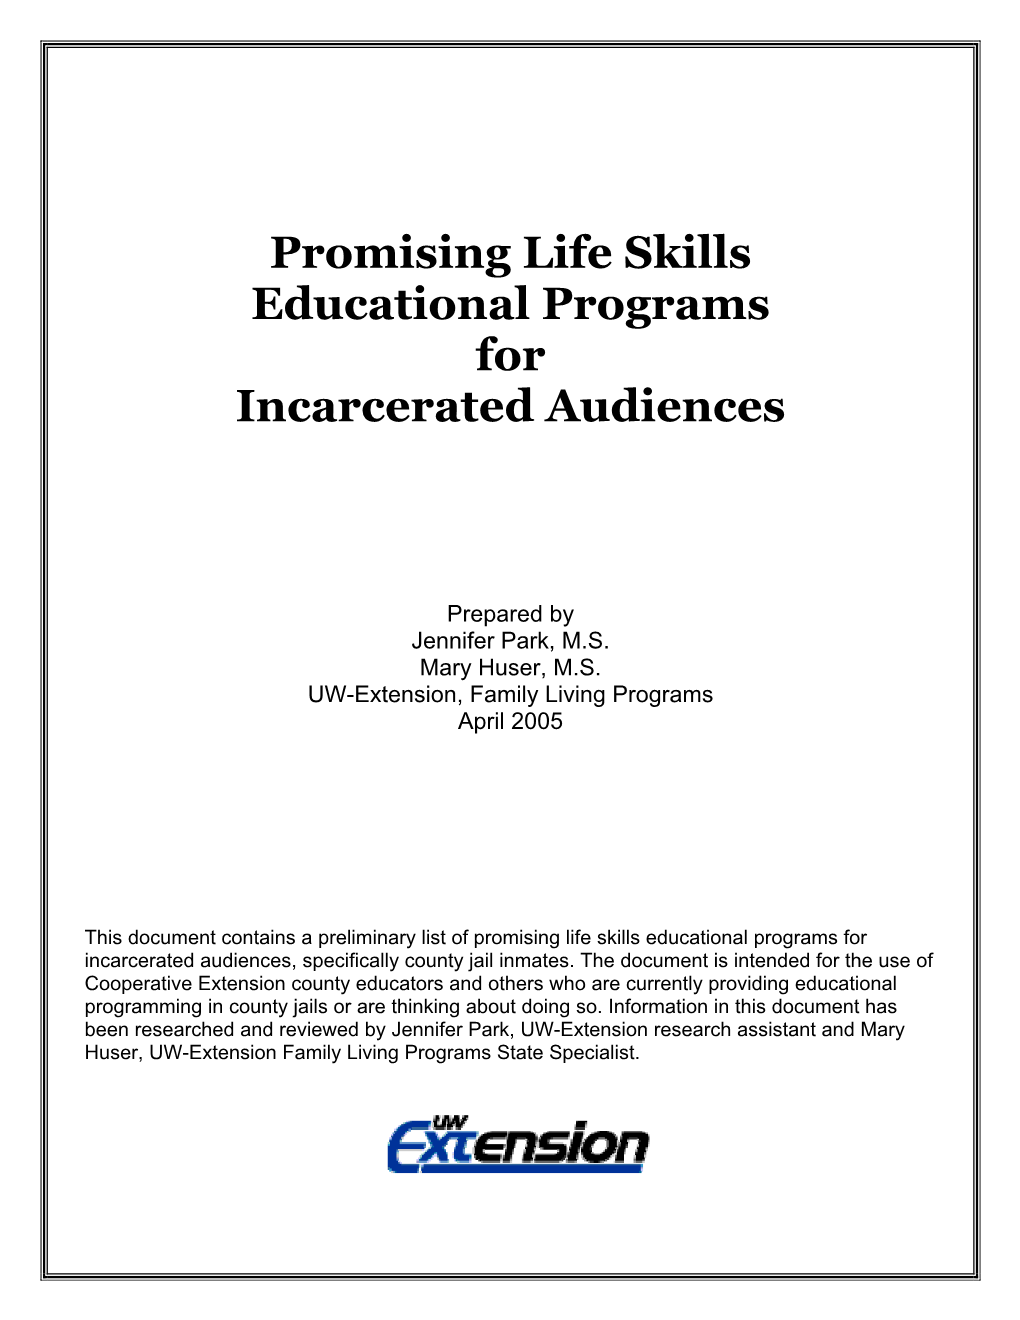 Promising Life Skills Educational Programs for Incarcerated Audiences